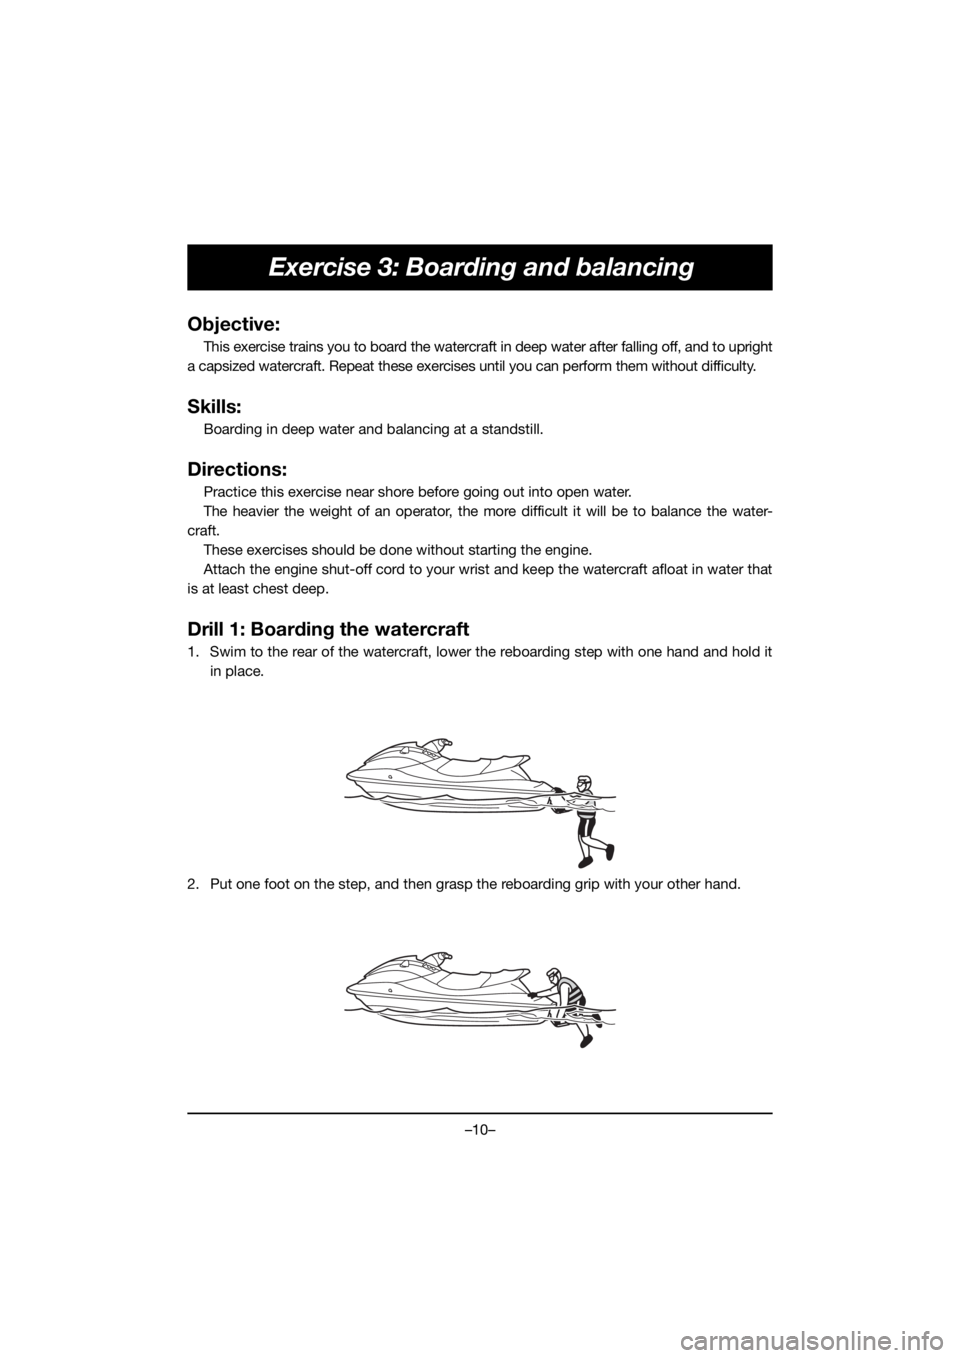 YAMAHA VX CRUISER HO 2021  Bruksanvisningar (in Swedish) –10–
Exercise 3: Boarding and balancing
Objective:
This exercise trains you to board the watercraft in deep water after falling off, and to upright
a capsized watercraft. Repeat these exercises un